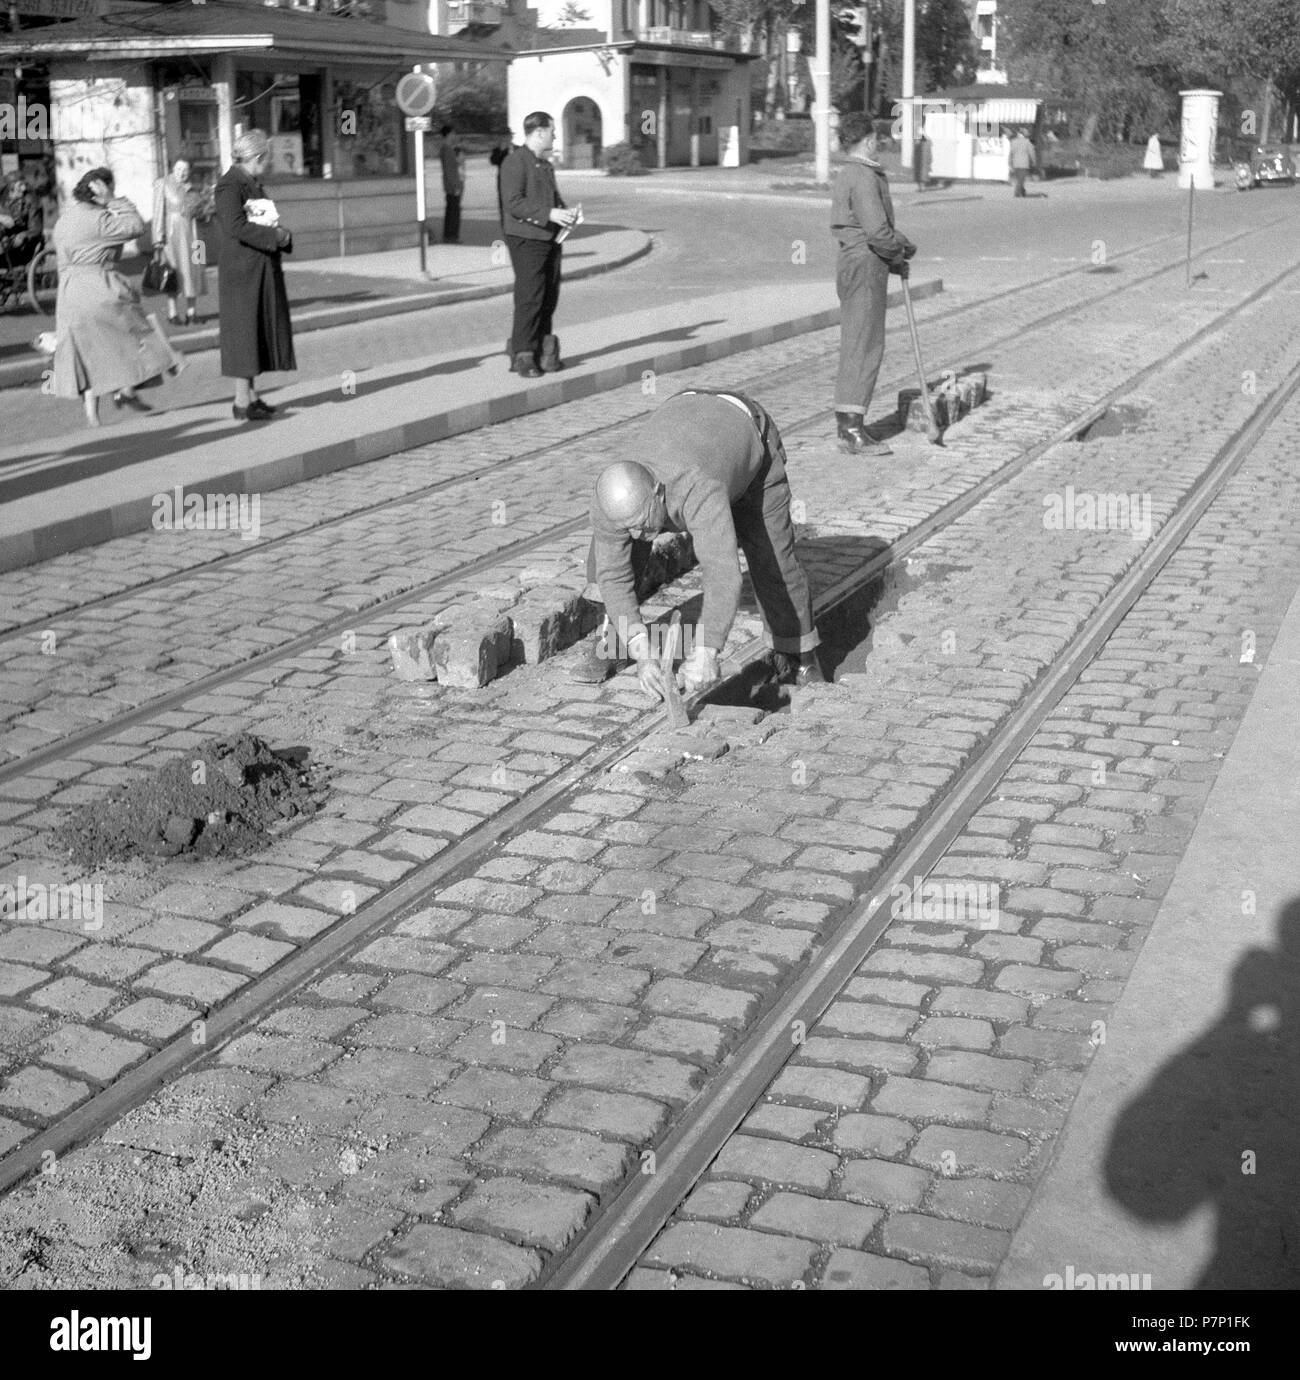 Construction workers paving a road around 1950, Freiburg, Germany Stock Photo